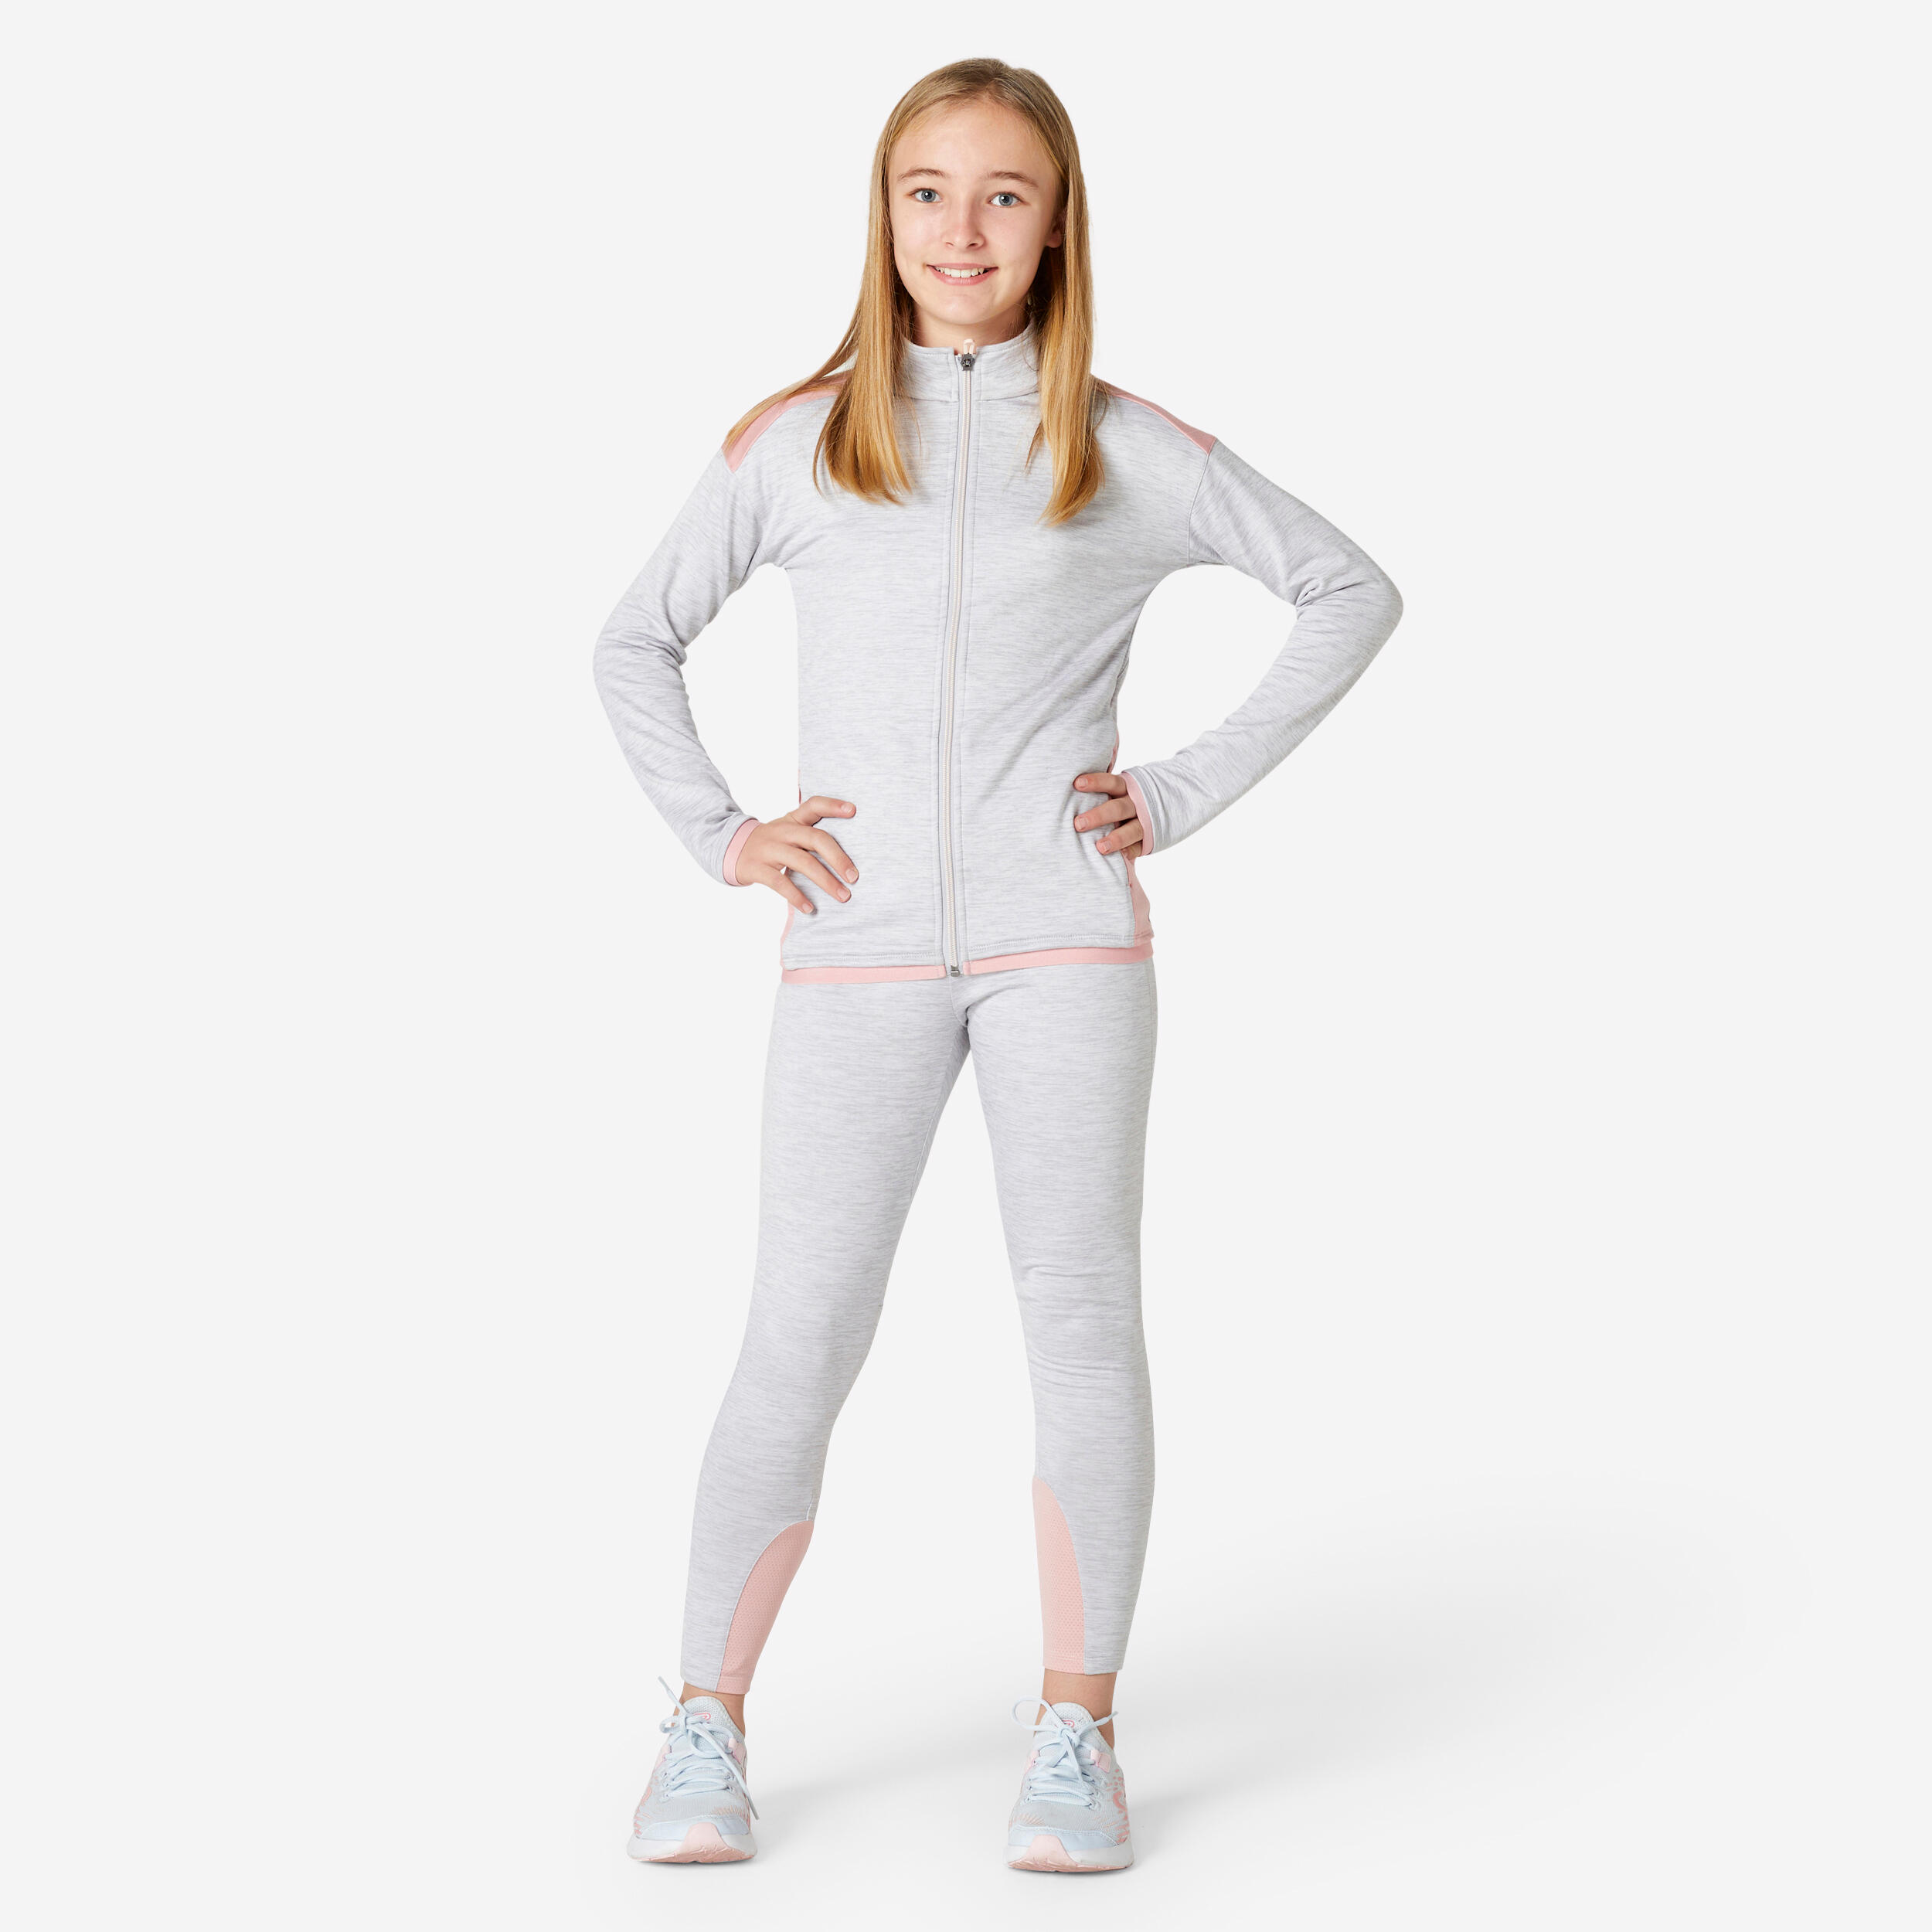 S 500 Synthetic Tracksuit - Kids - DOMYOS